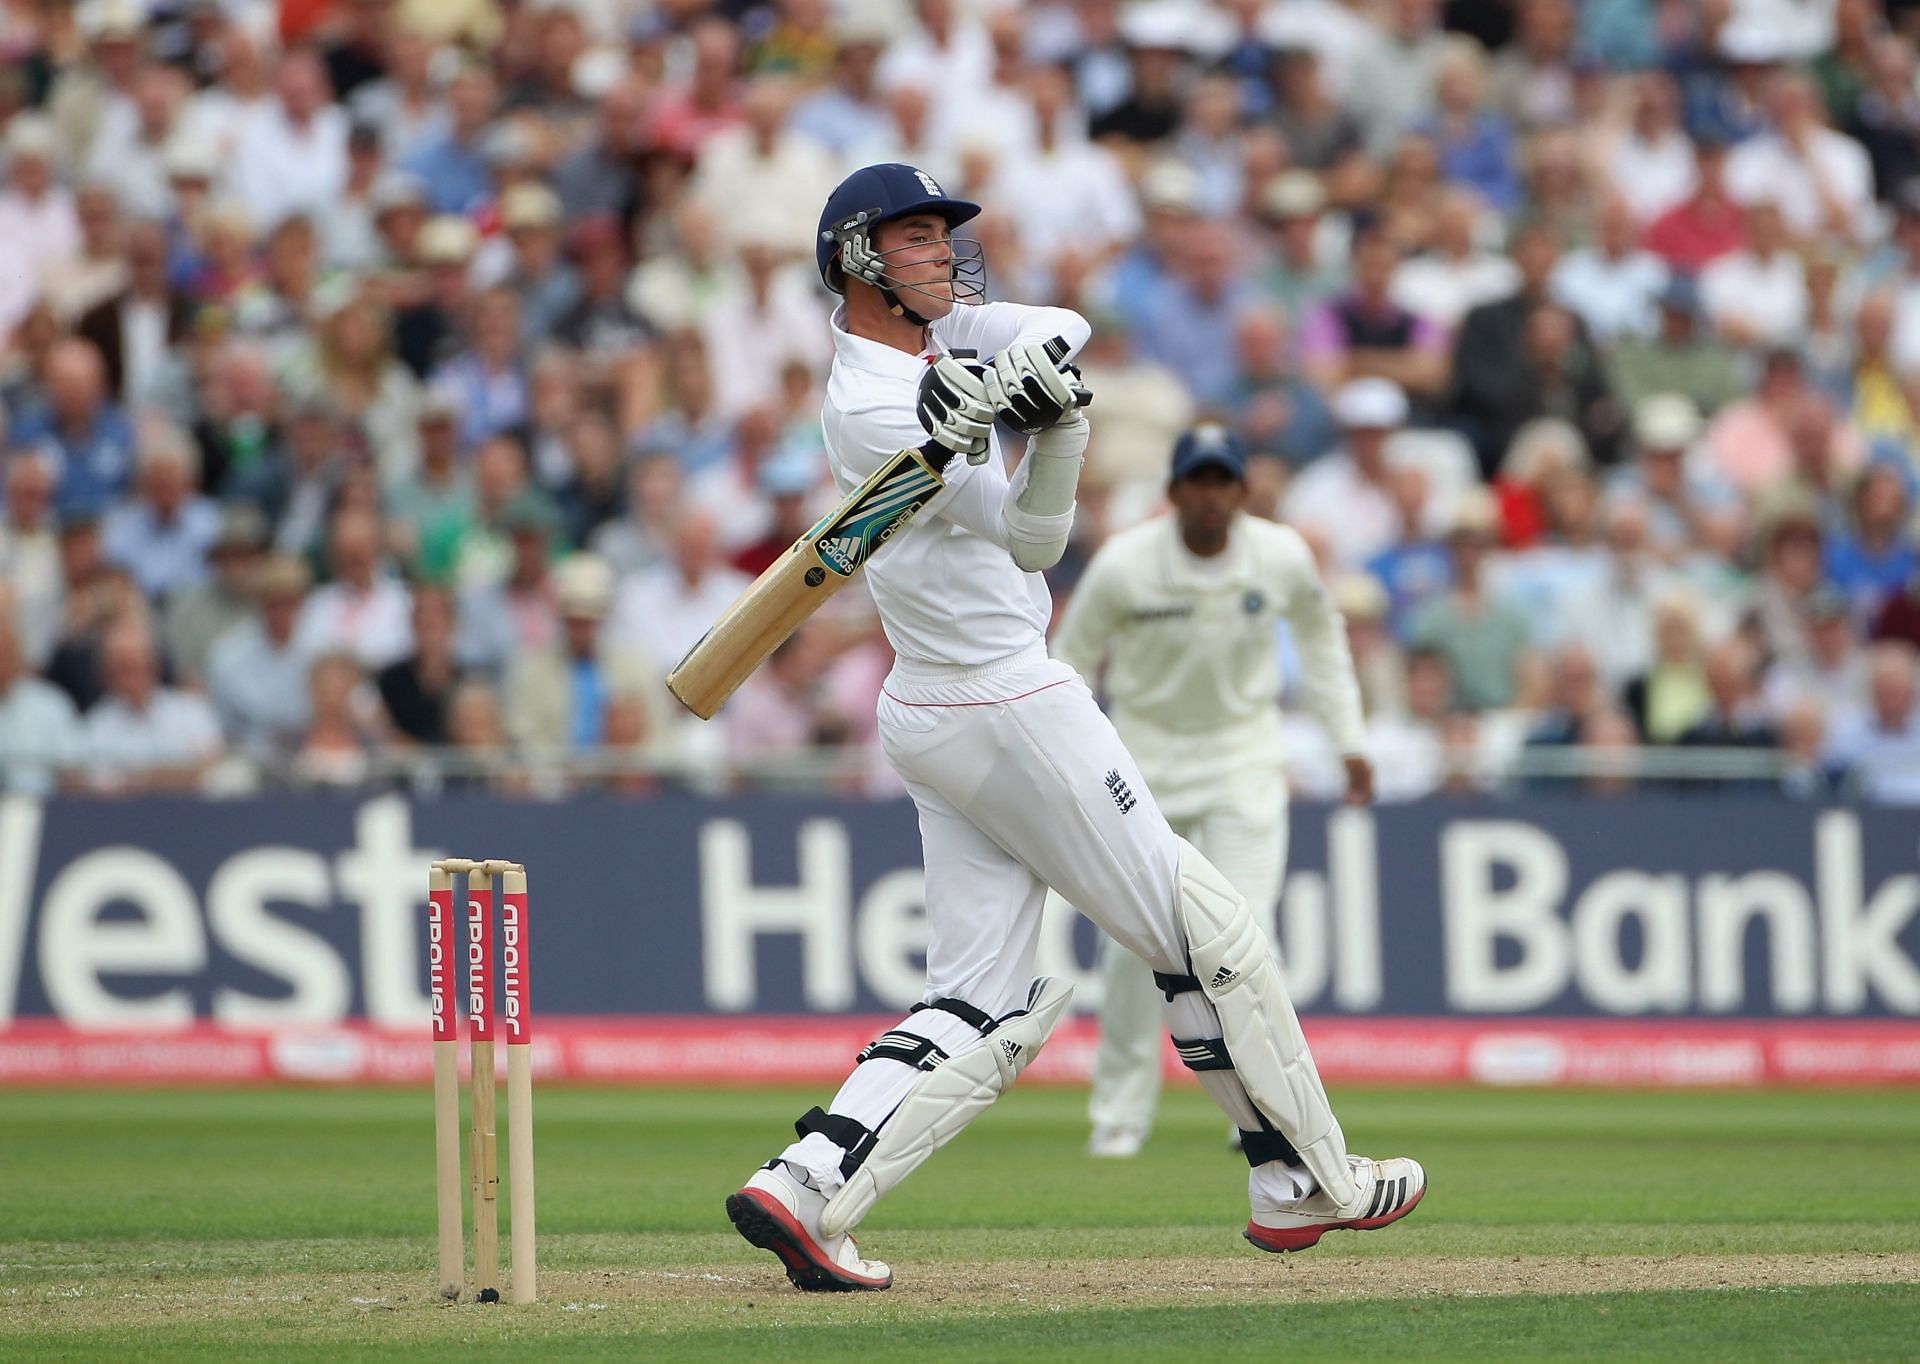 Stuart Broad hit out at will in the Trent Bridge Test of 2011.